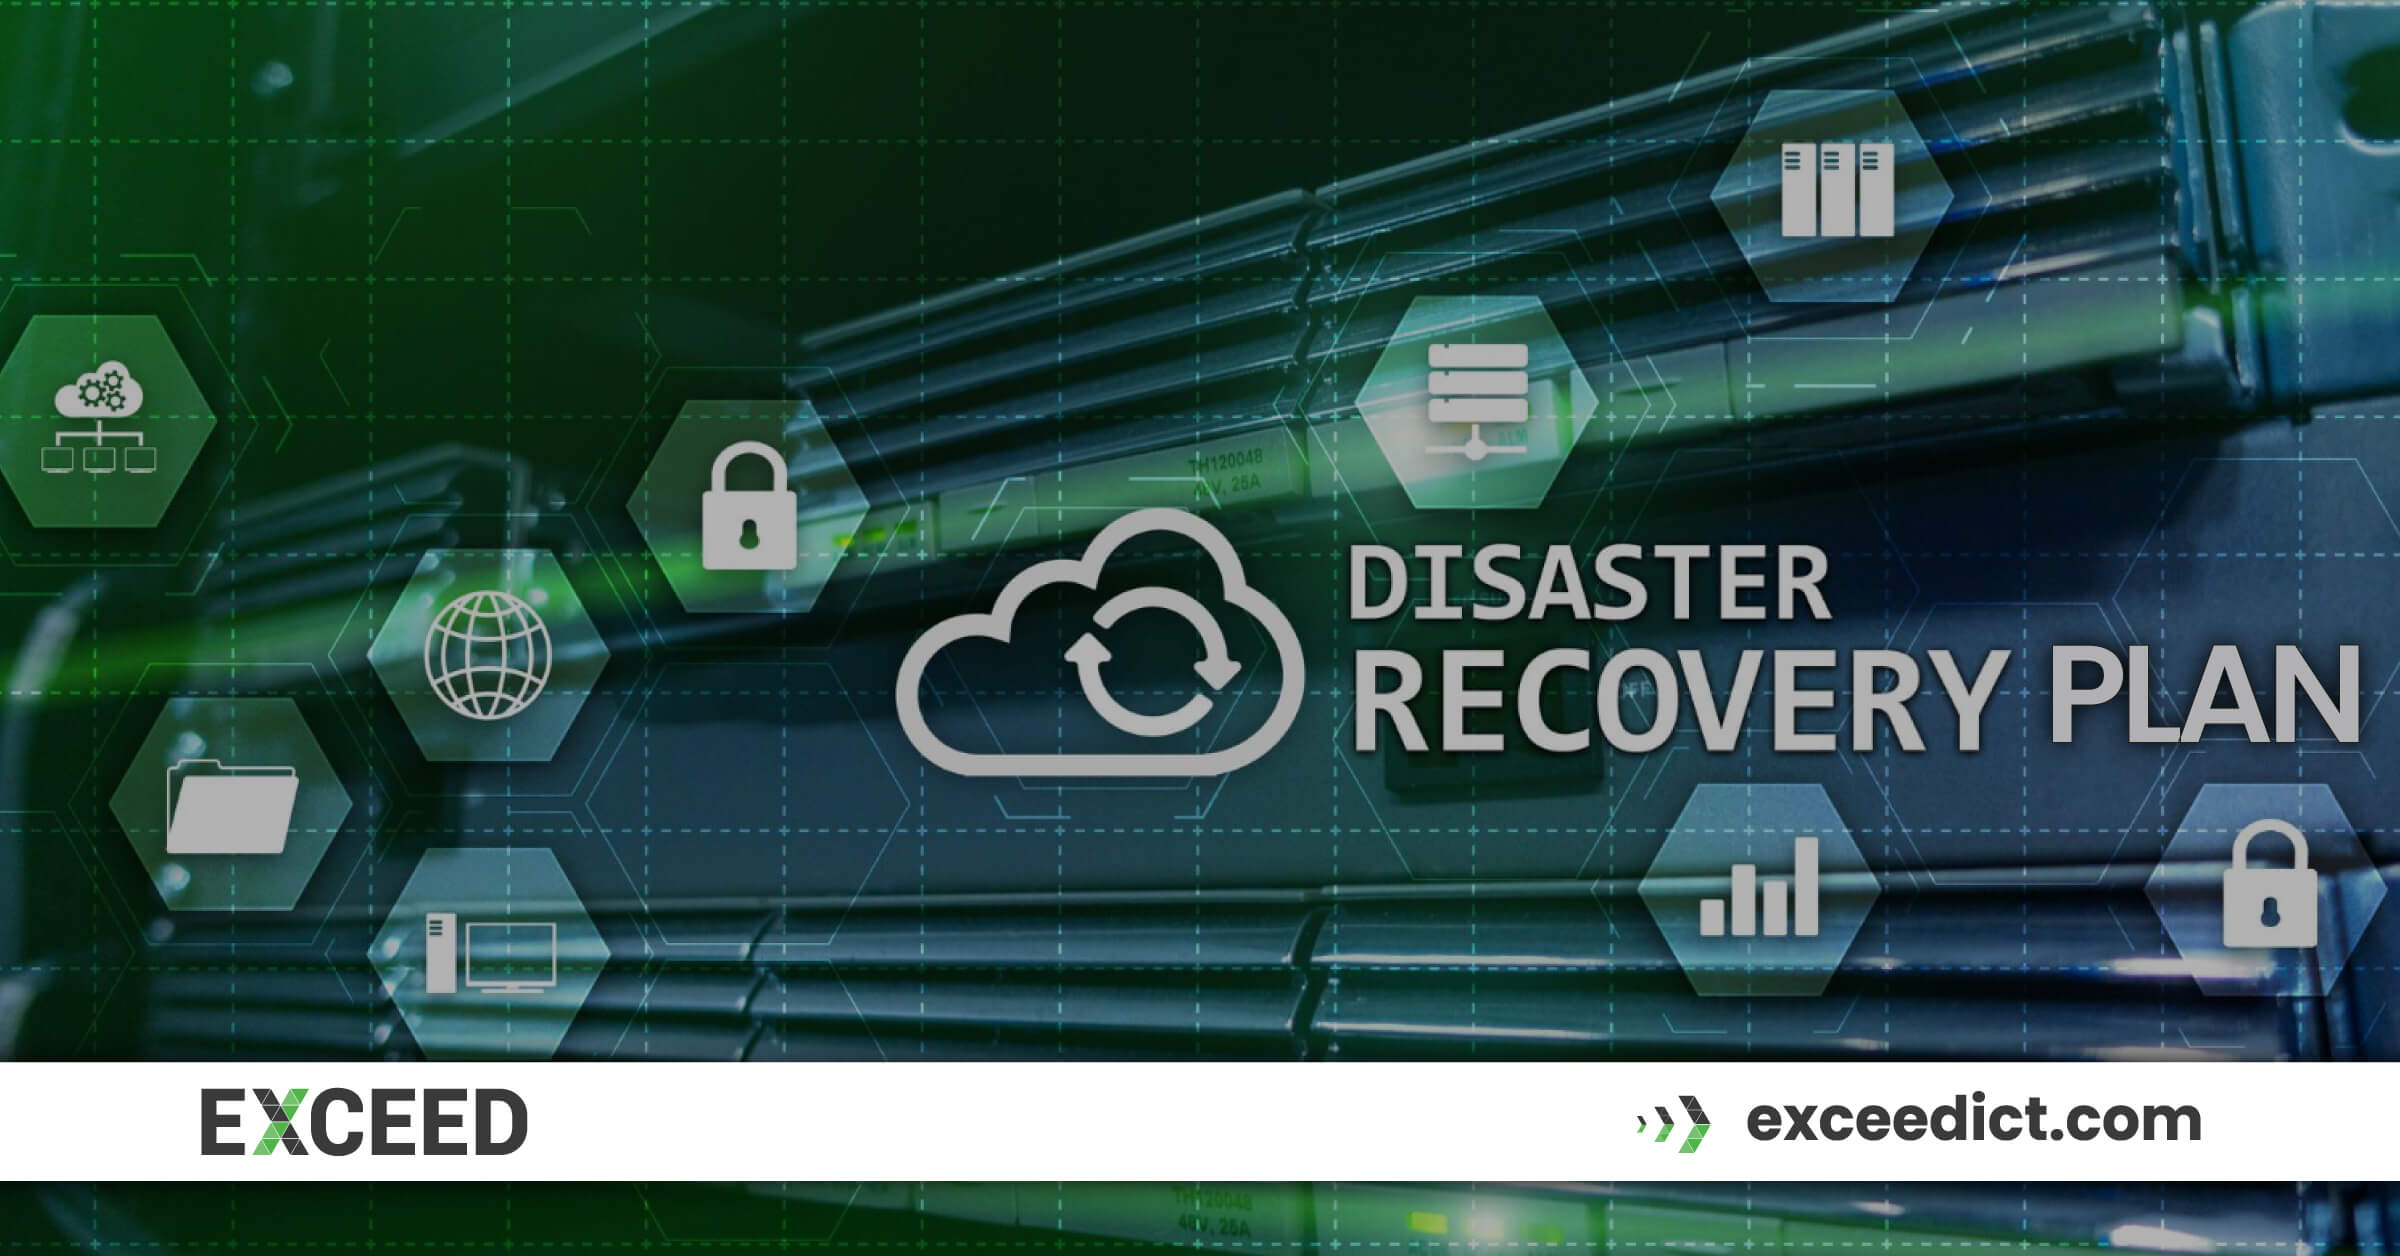 10 steps for optimal IT disaster recovery plan design